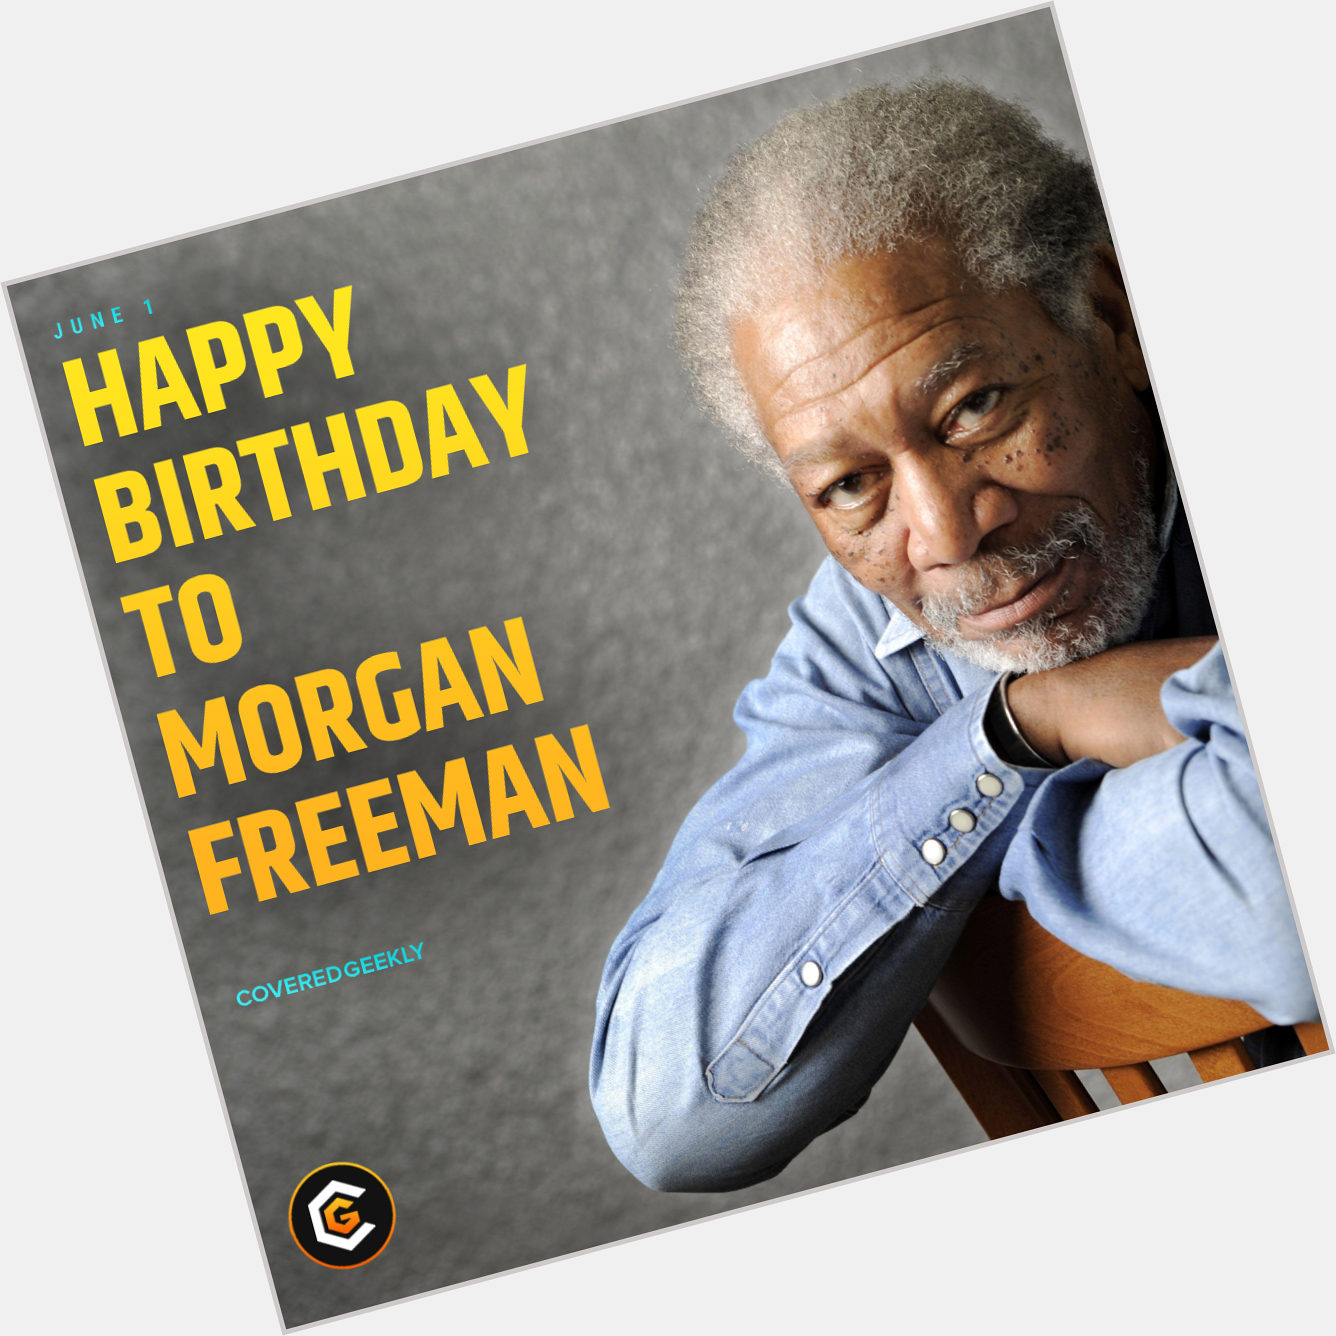 Morgan Freeman turns 85 years old today.

Happy Birthday to the legend. 